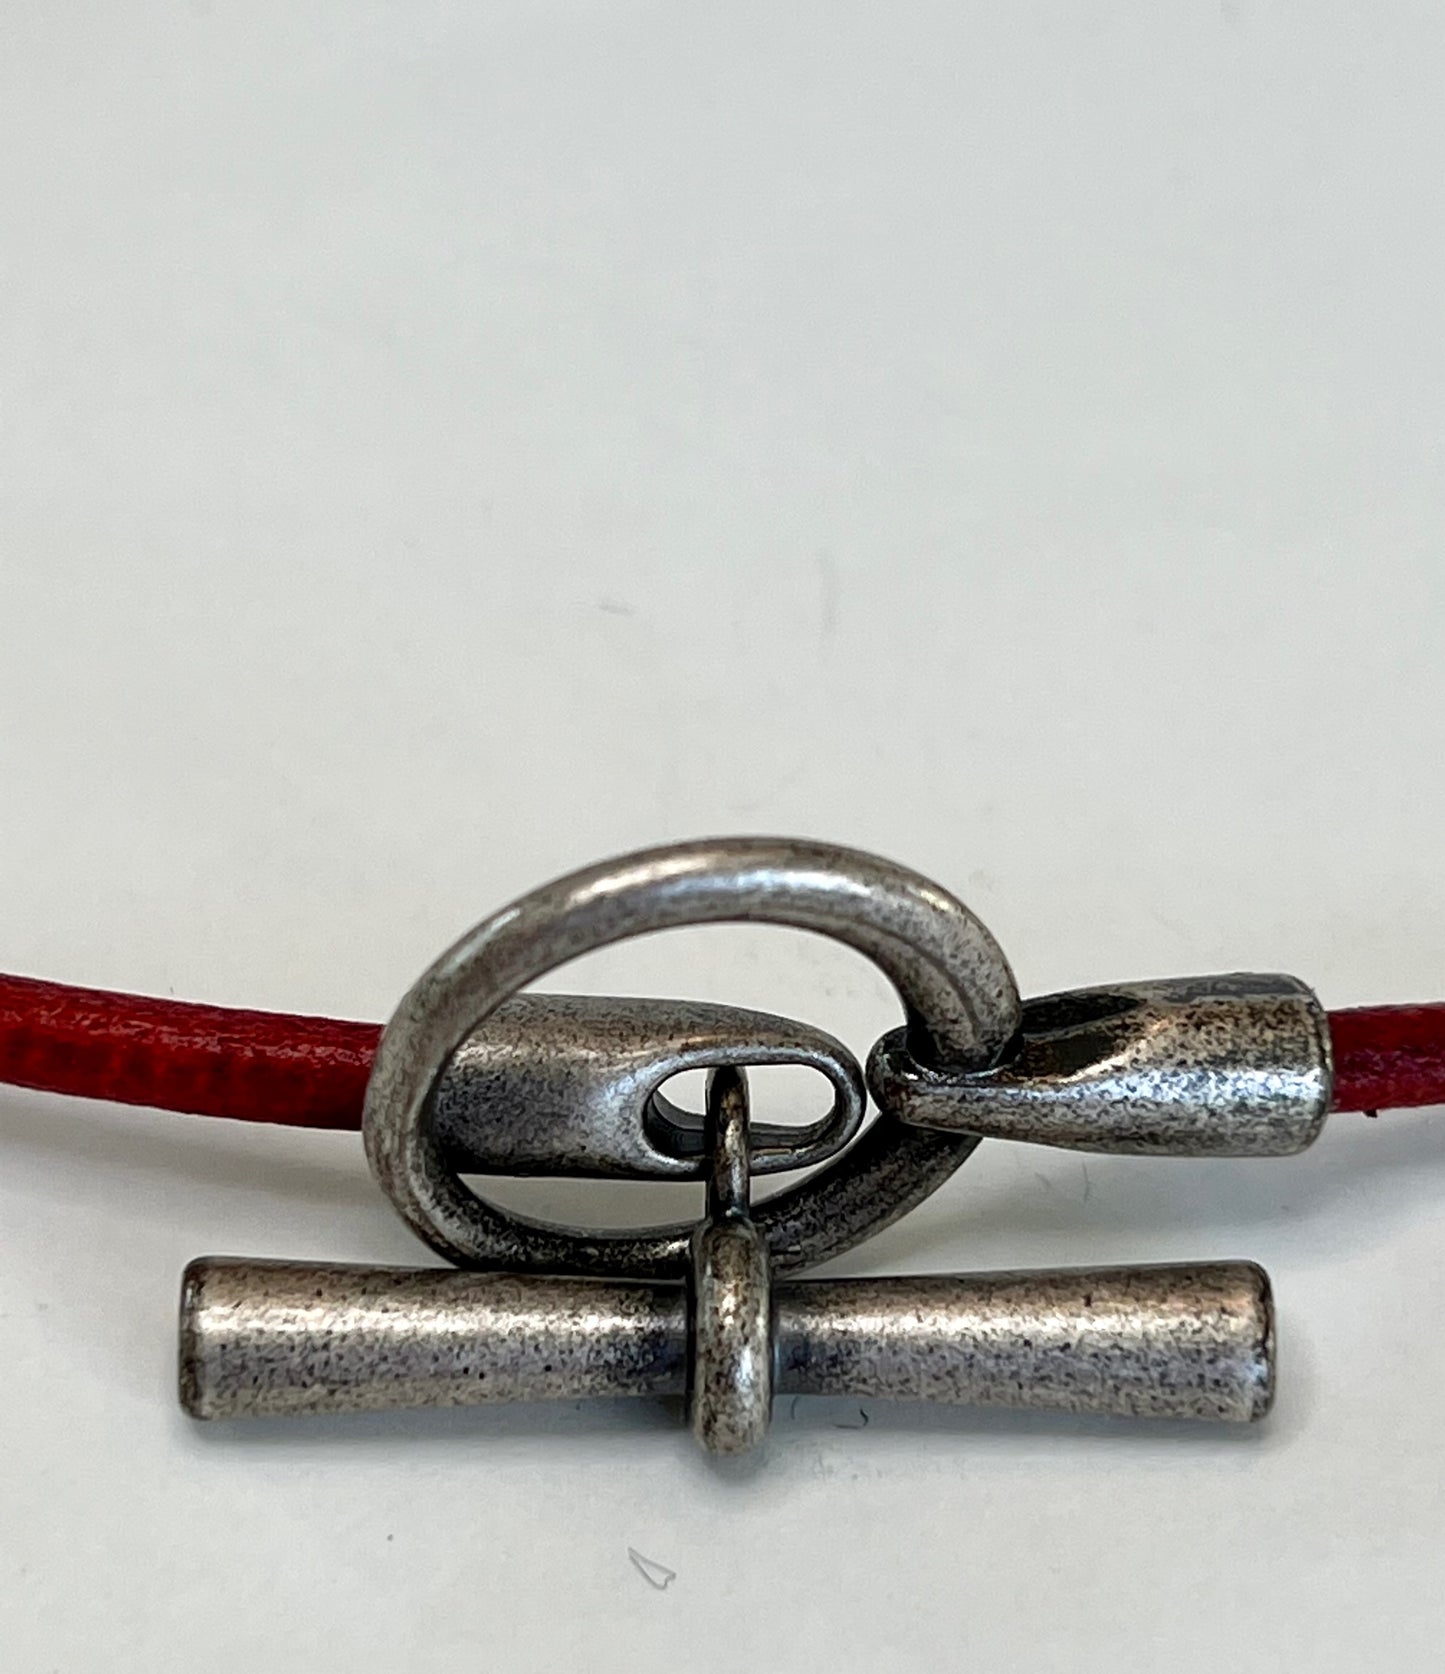 Leather Necklace. Red Italian leather choker necklace fashioned with a center silver toggle clasp.